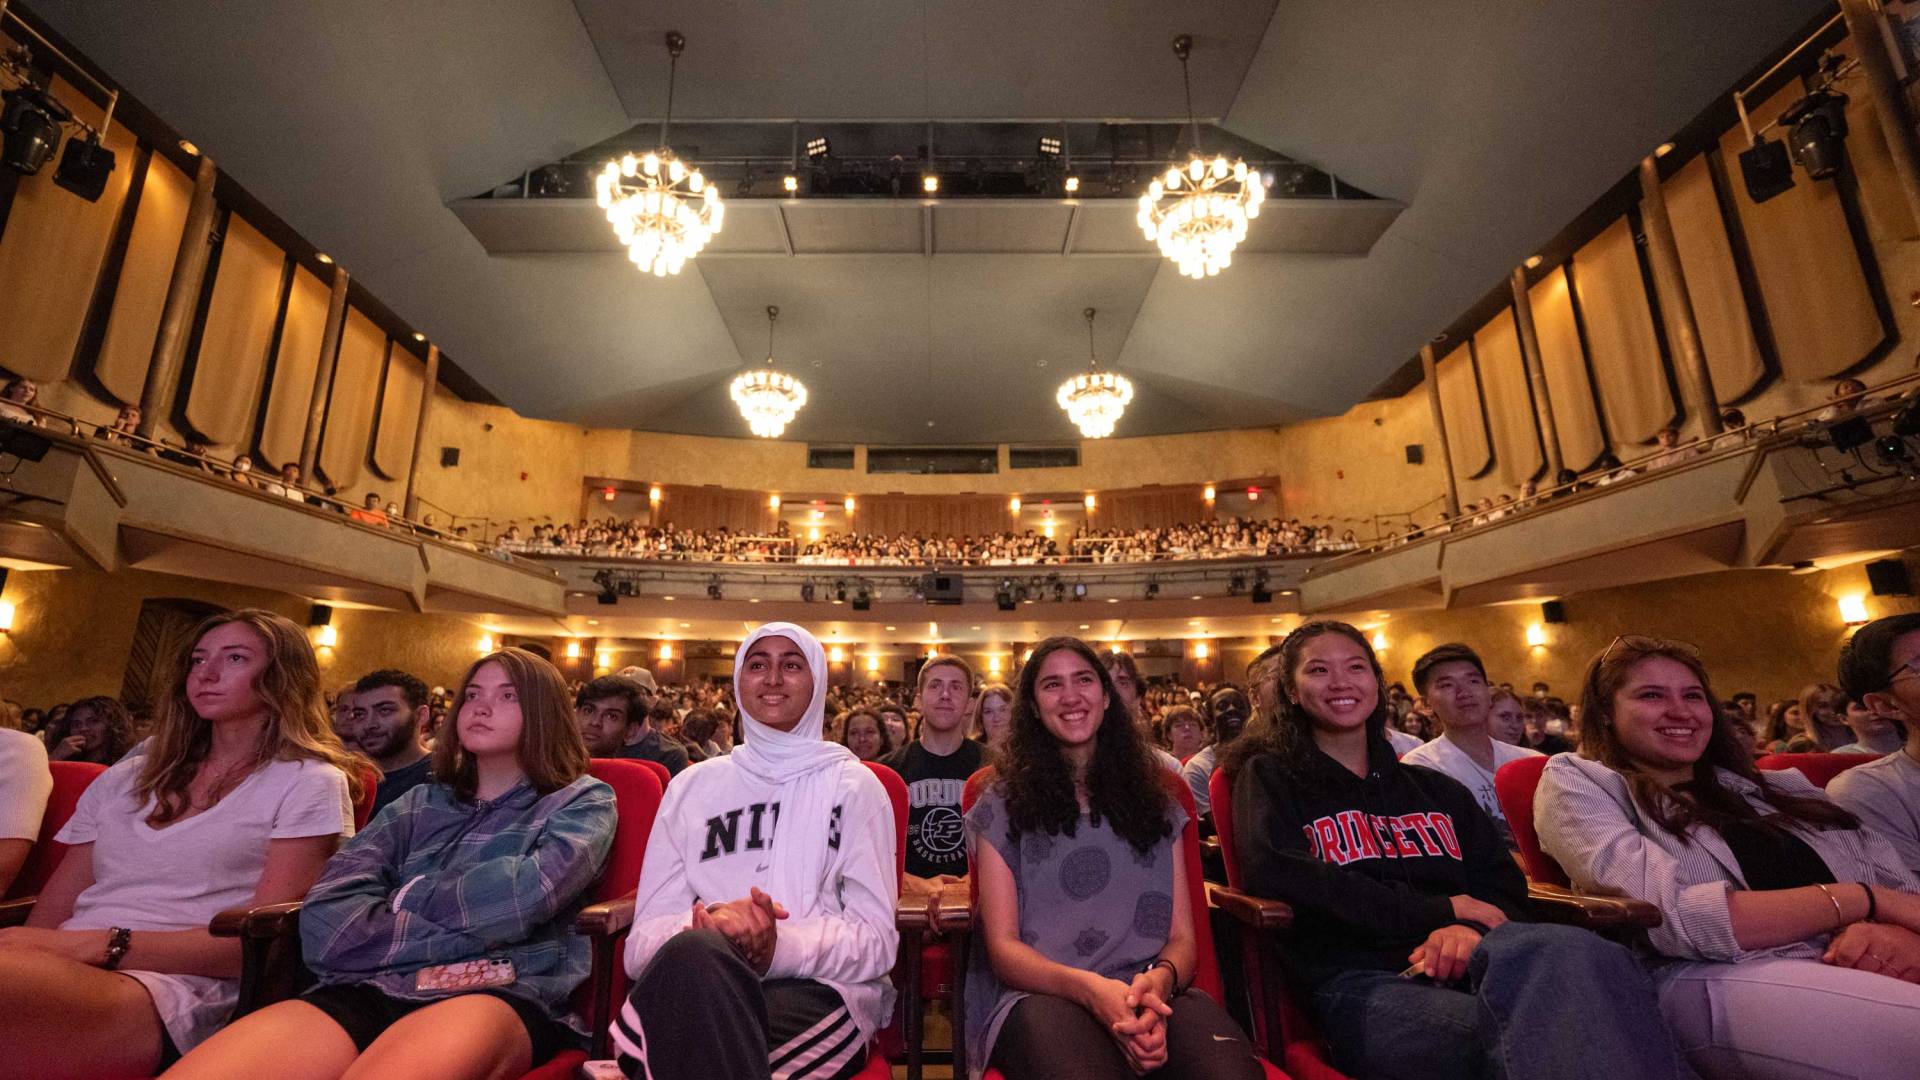 Students fill the seats of the auditorium